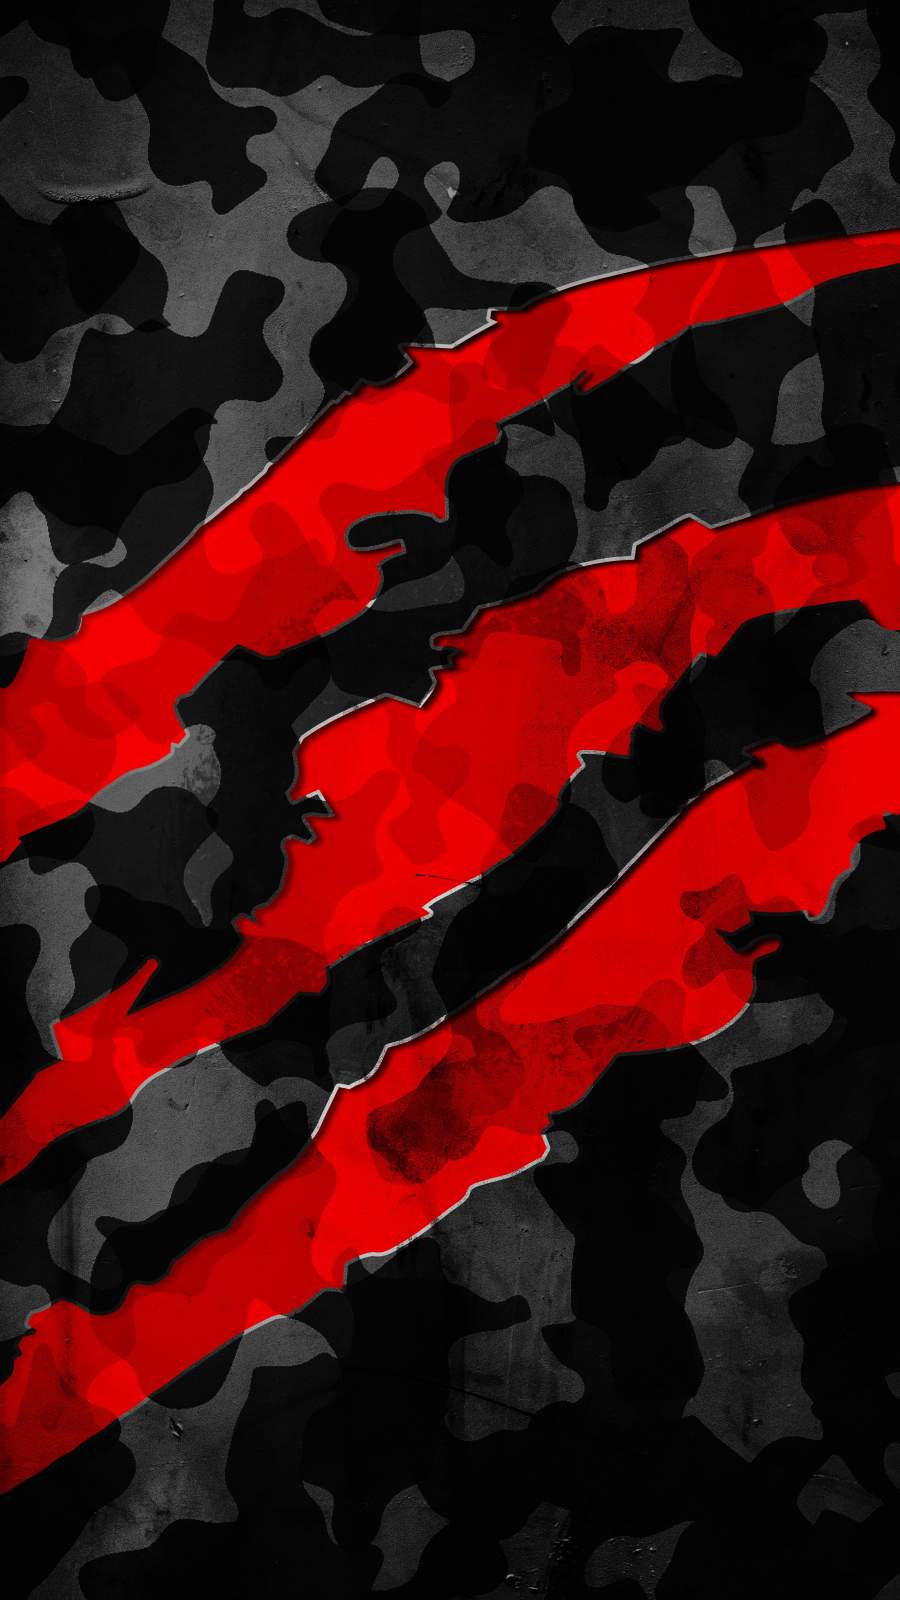 Beast Claw IPhone Wallpaper - IPhone Wallpapers : iPhone Wallpapers